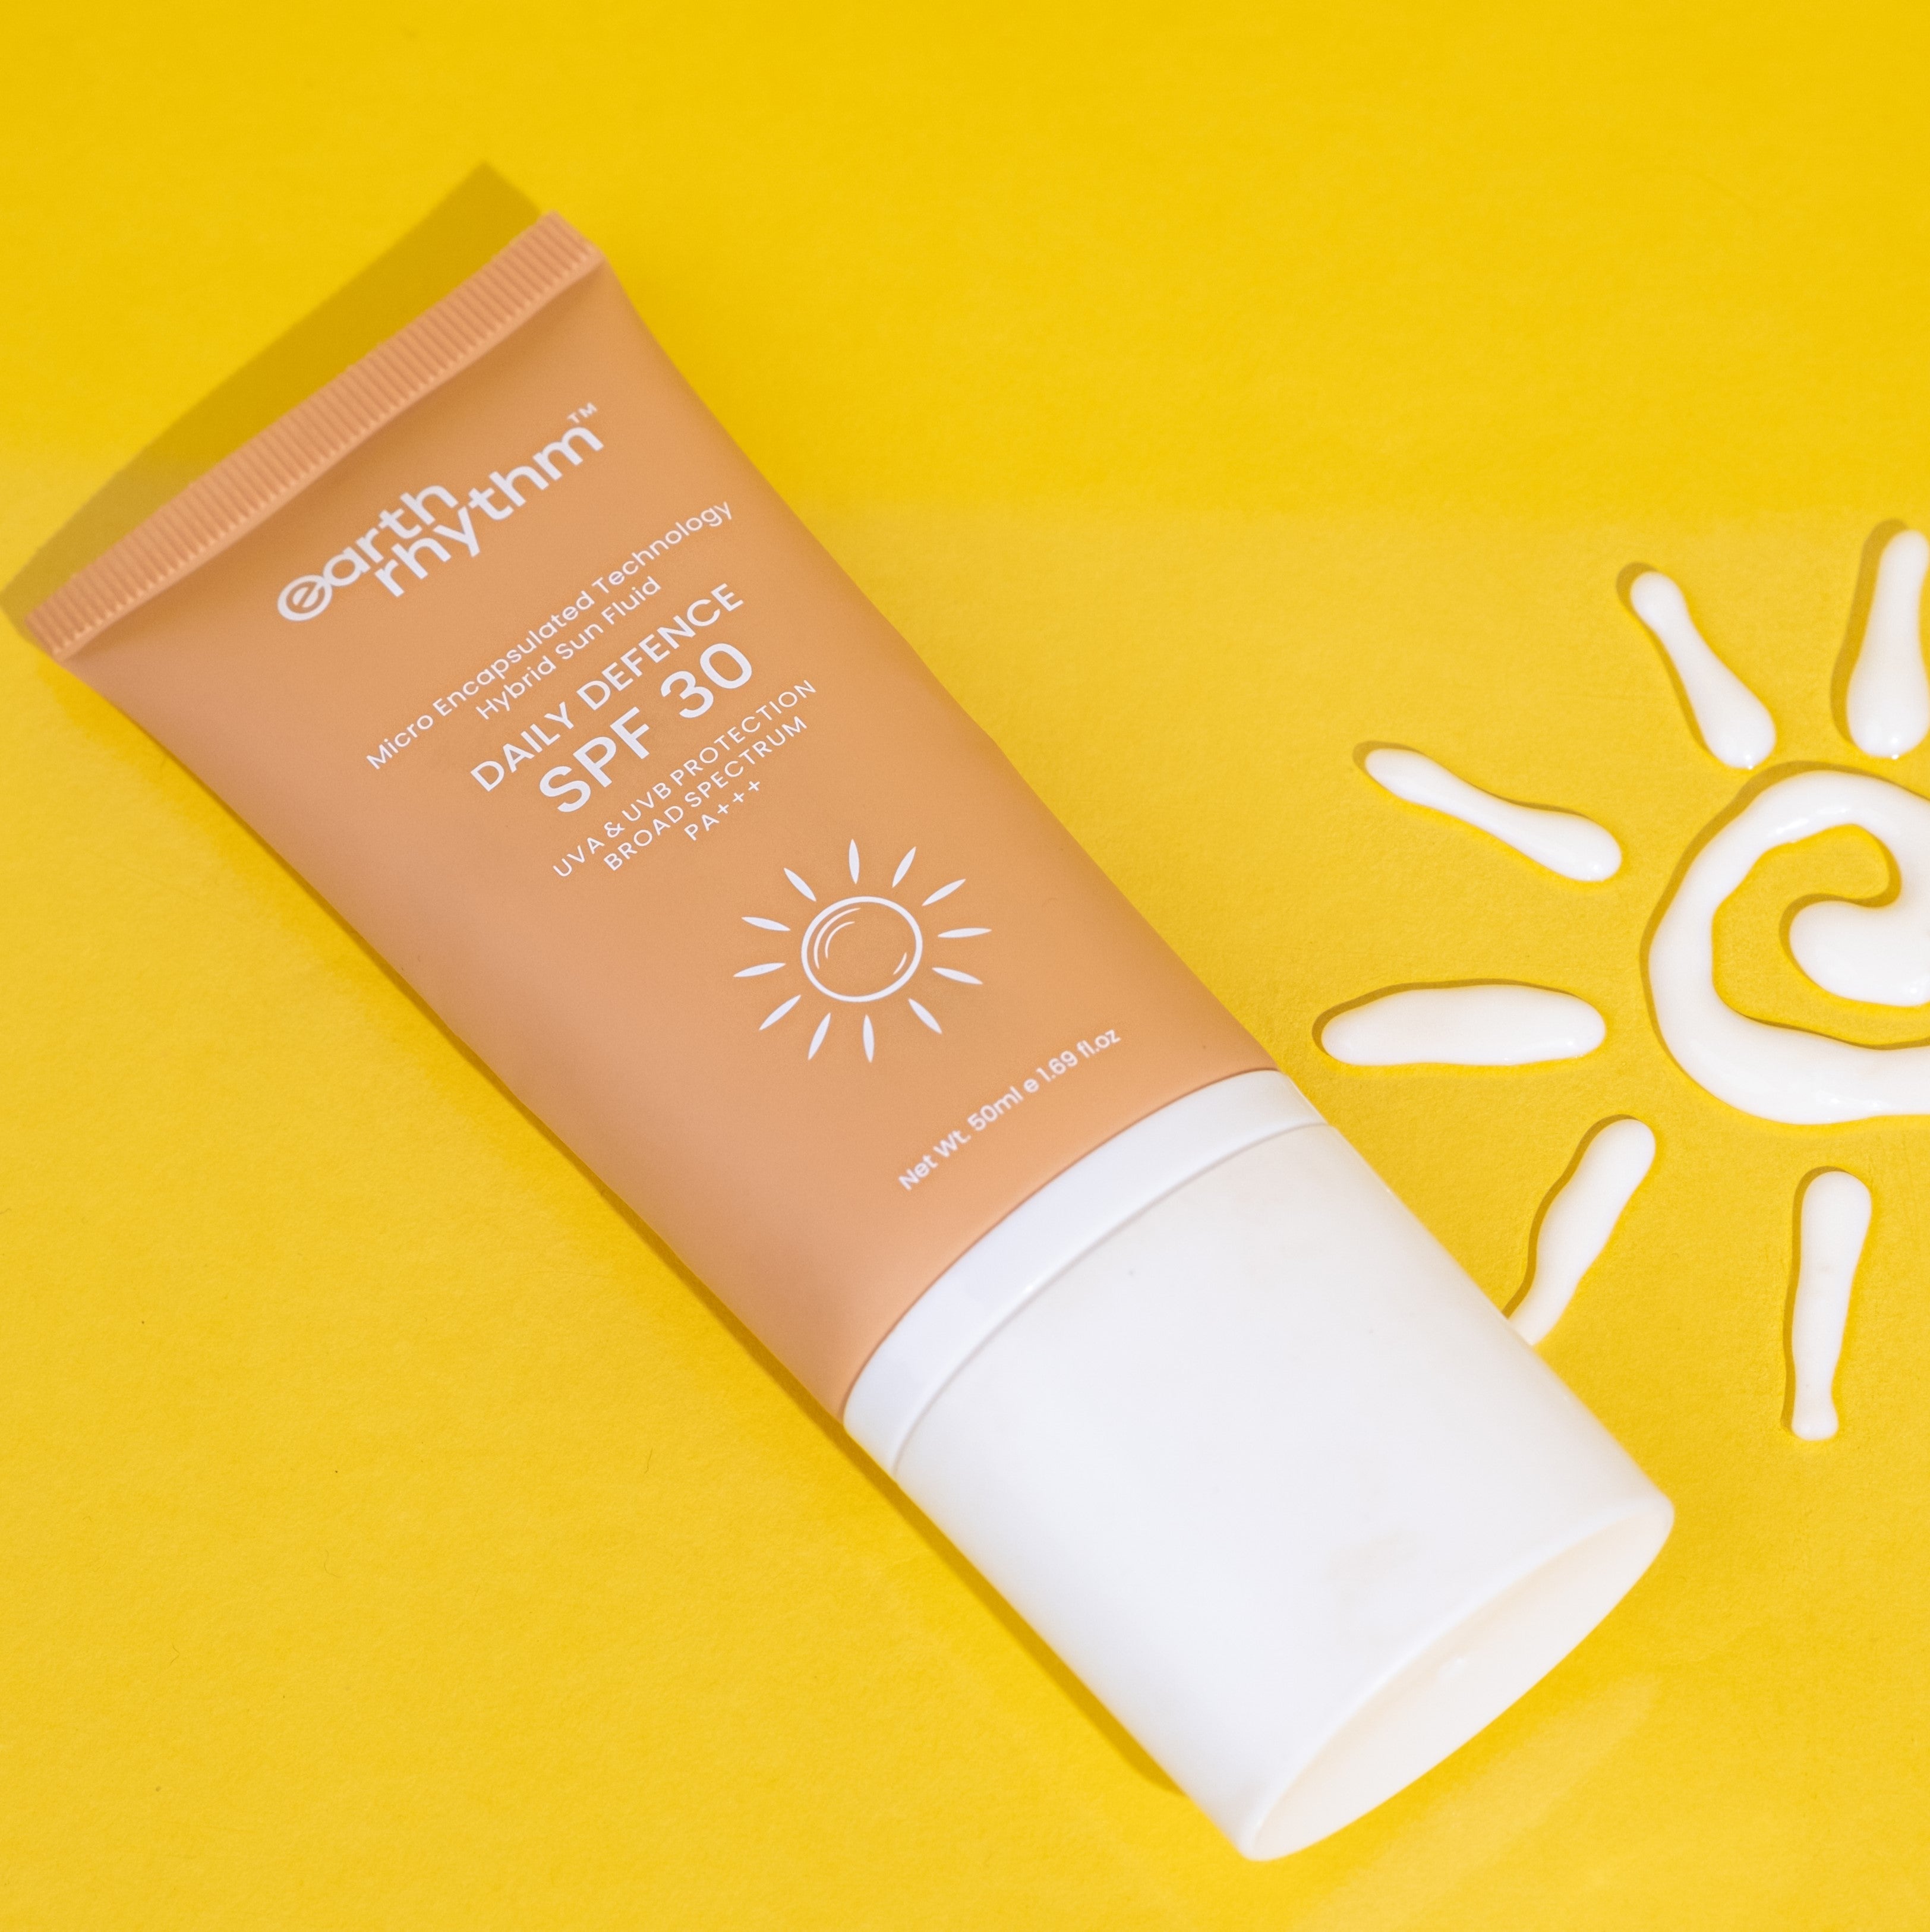 Daily defence spf 30 sunscreen